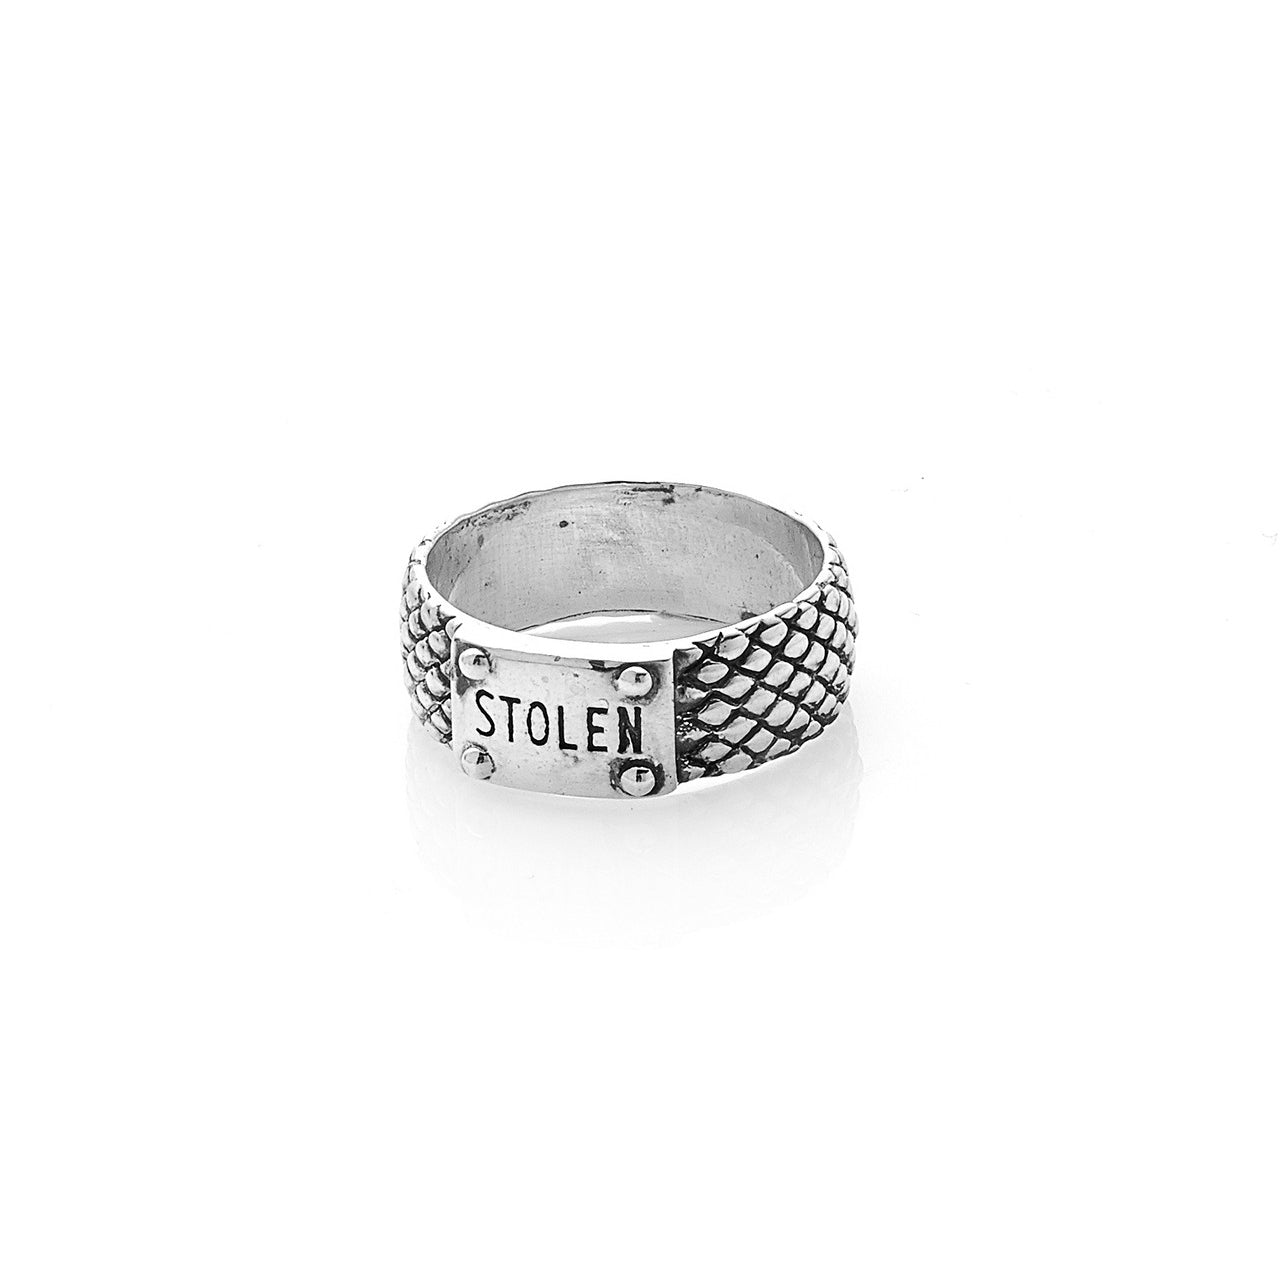 STOLEN GIRLFRIENDS CLUB SNAKE BAND SKINNY RING  The Stolen Girlfriends Club Snake Band Skinny Ring is a edgy textured ring, featuring a snake skin pattern around the outer ring, finished with a signature 'STOLEN' branded plaque. Simple, edgy and stylish, wear The Stolen Girlfriends Club Snake Band Skinny Ring daily or for your chosen occasion.  